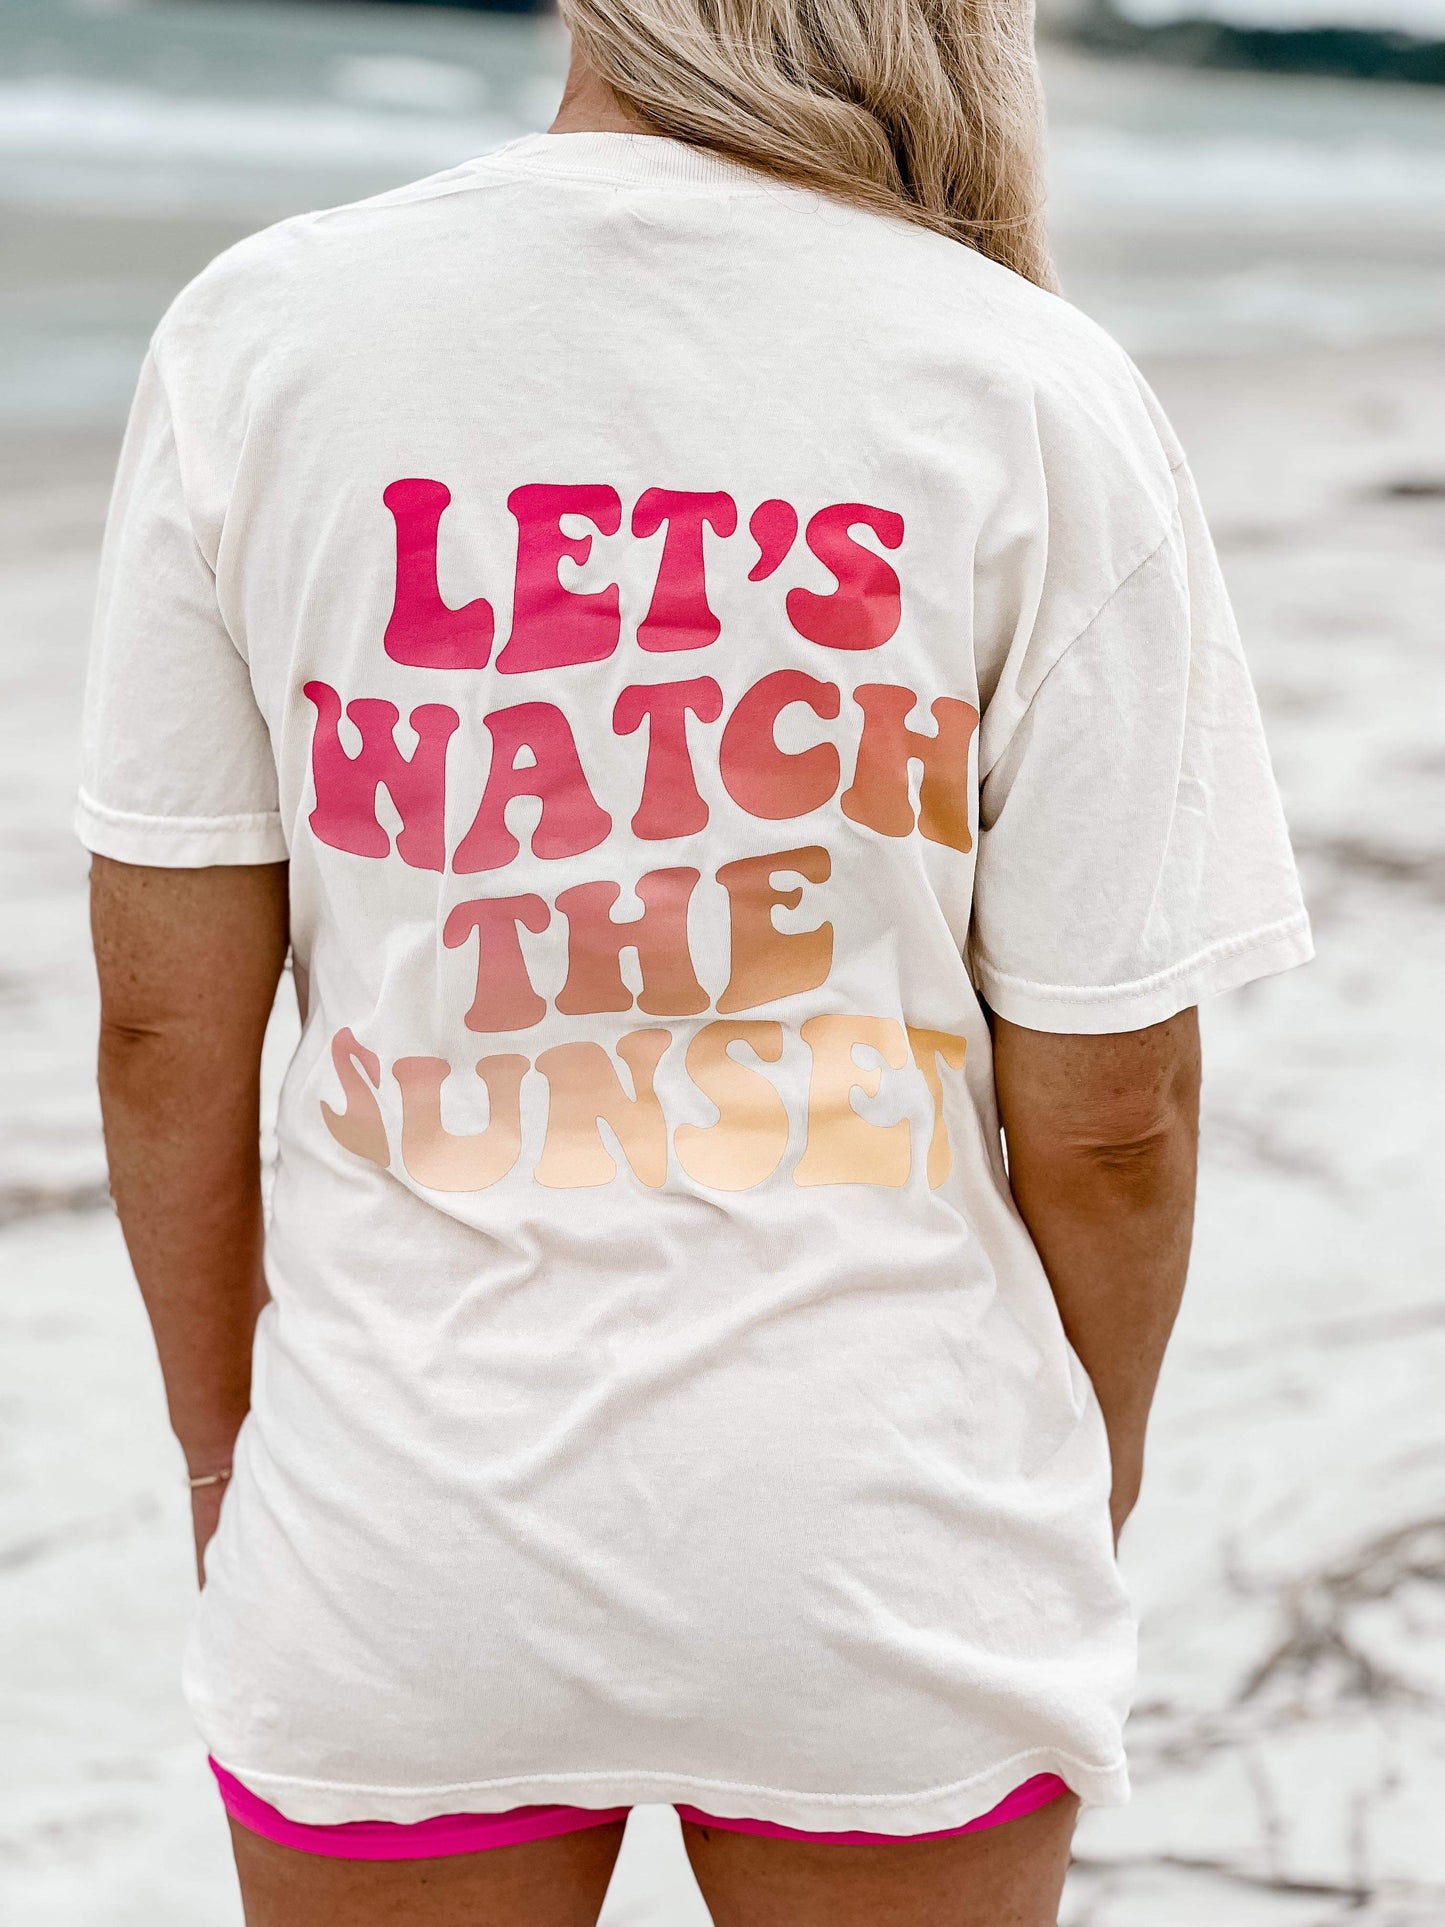 Let’s watch the sunset ( comfort colors tee)